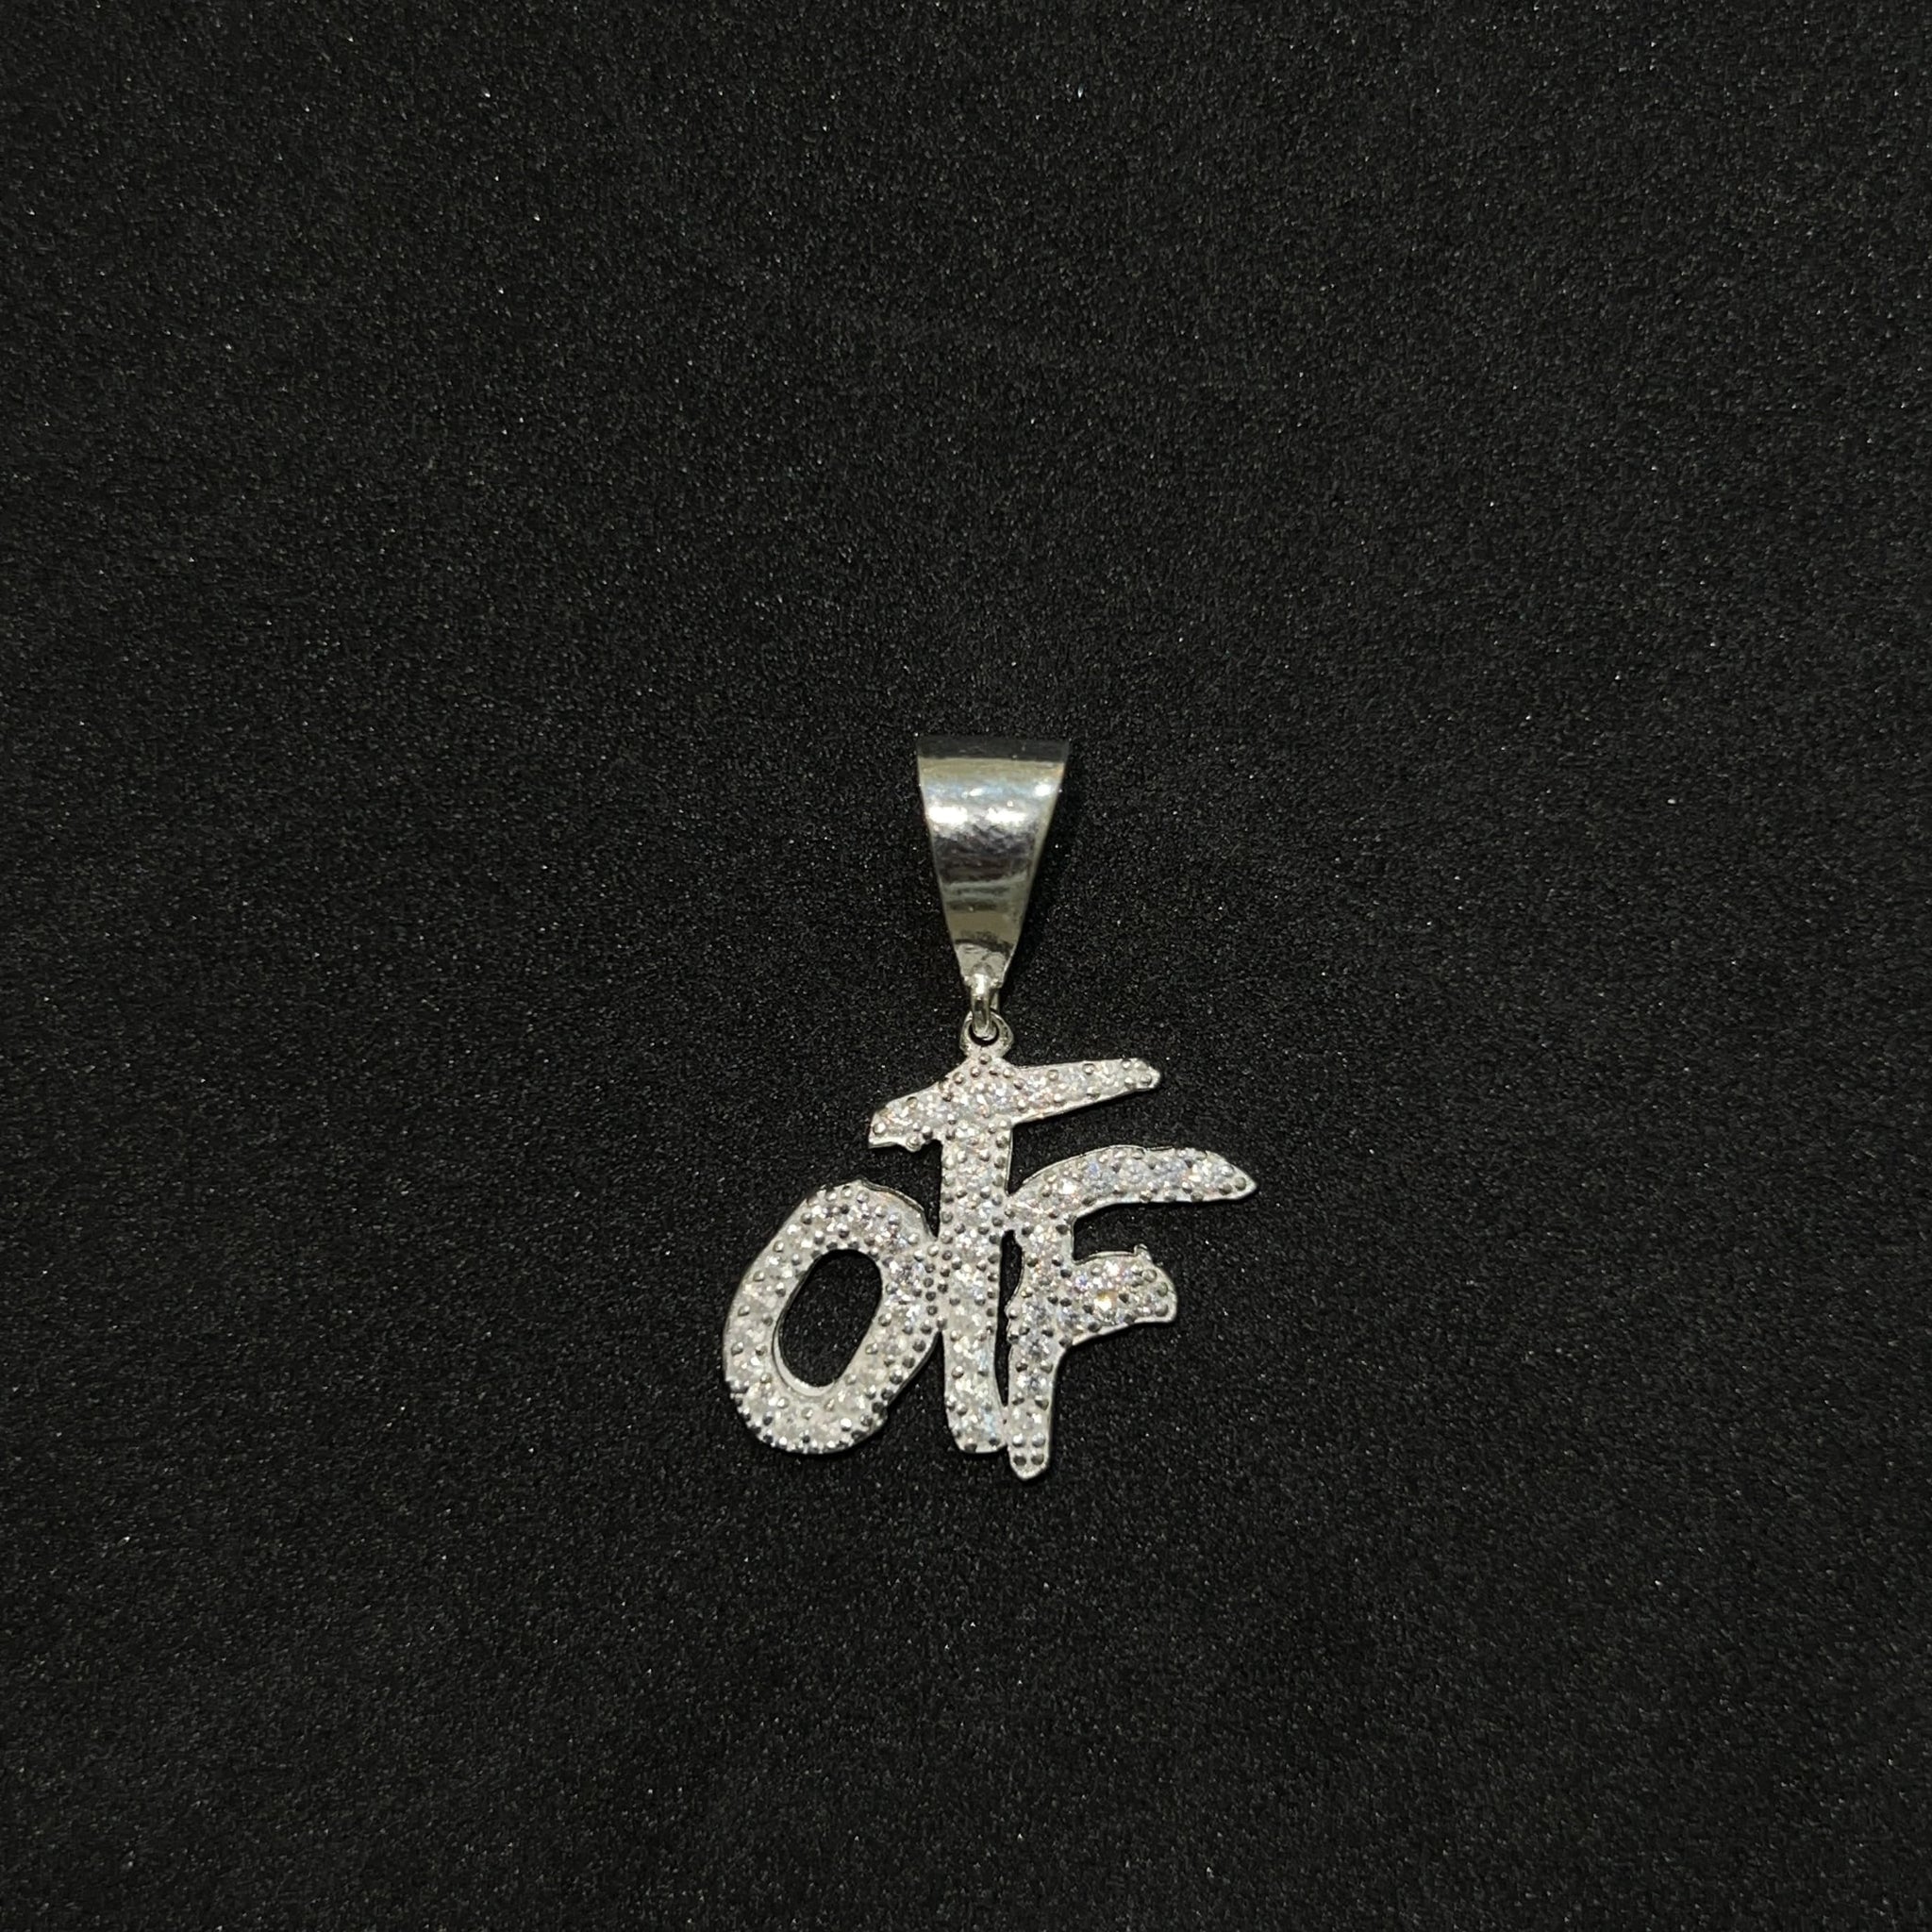 Mini Otf (Only the Fam) Pendant - Iced Out - Silver 925